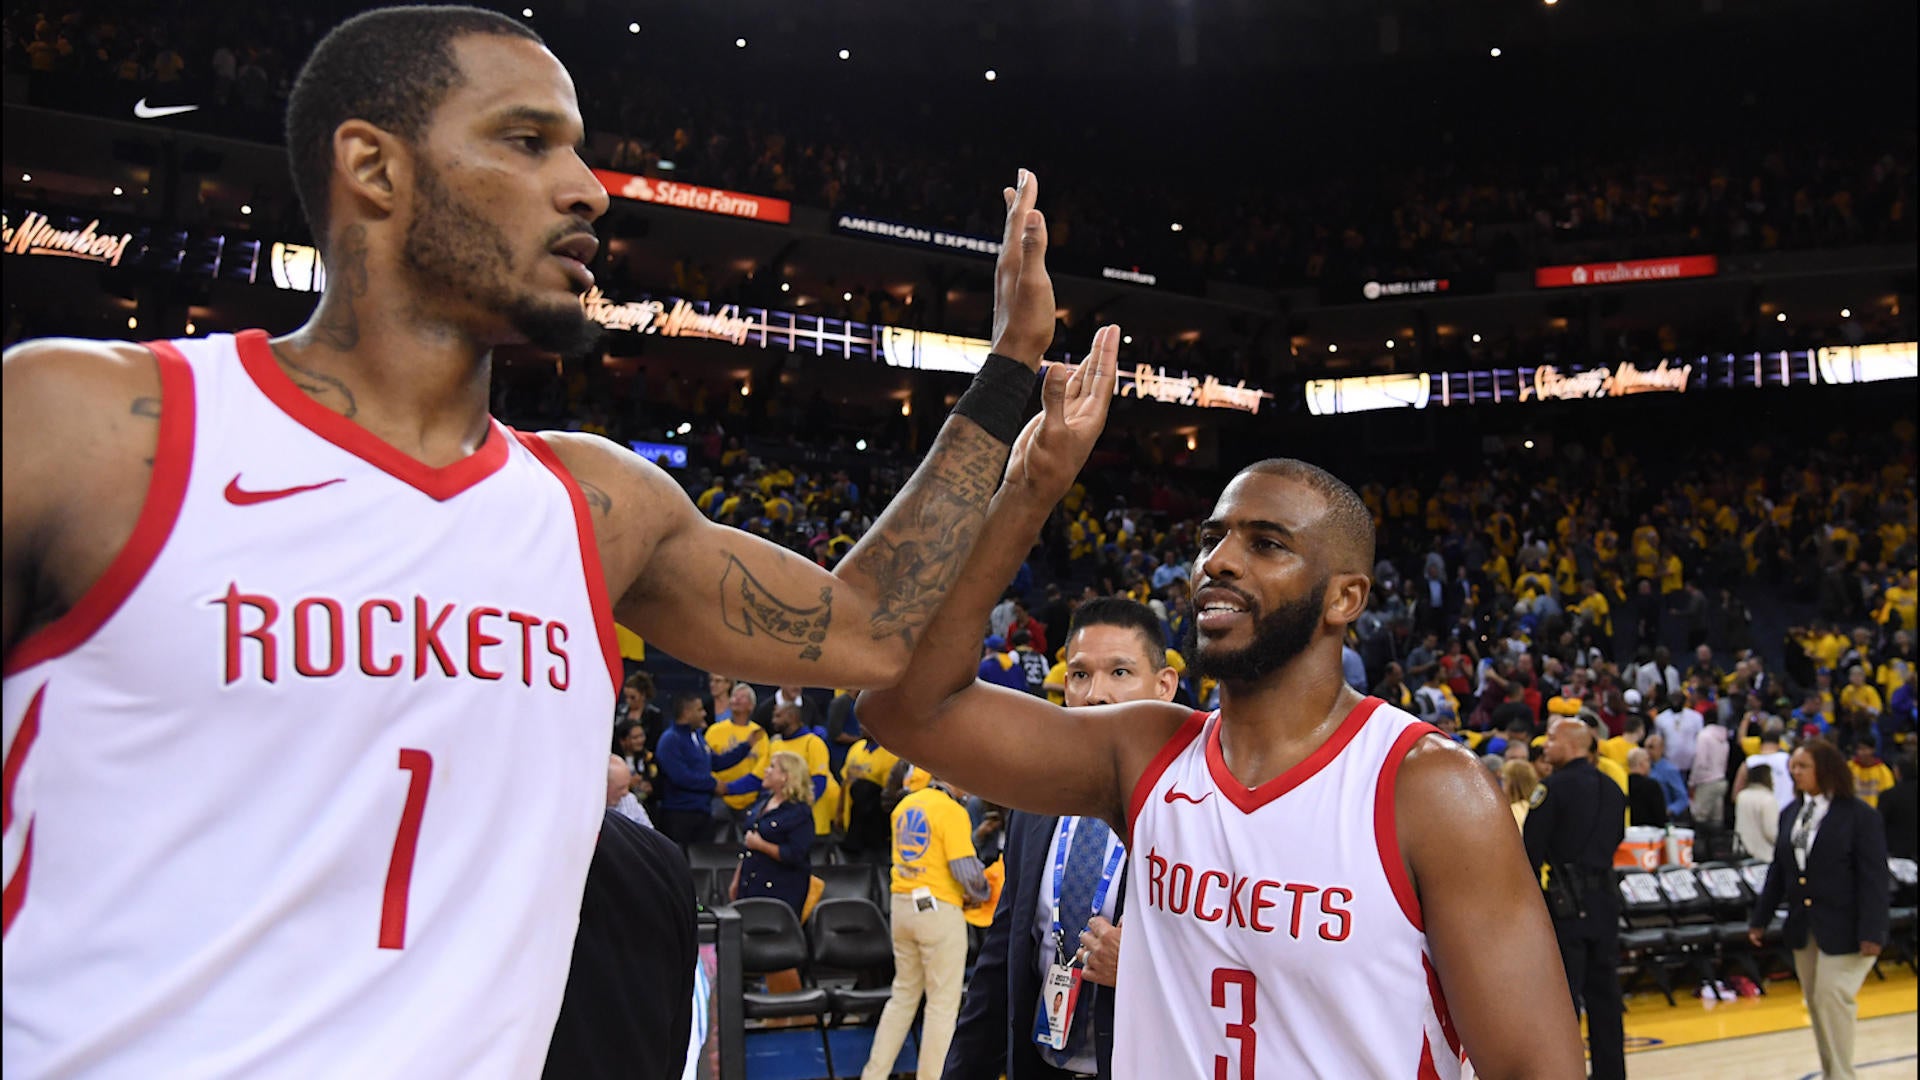 Image result for Rockets vs. Warriors: Game 4 revives playoff drama missing in Western finals